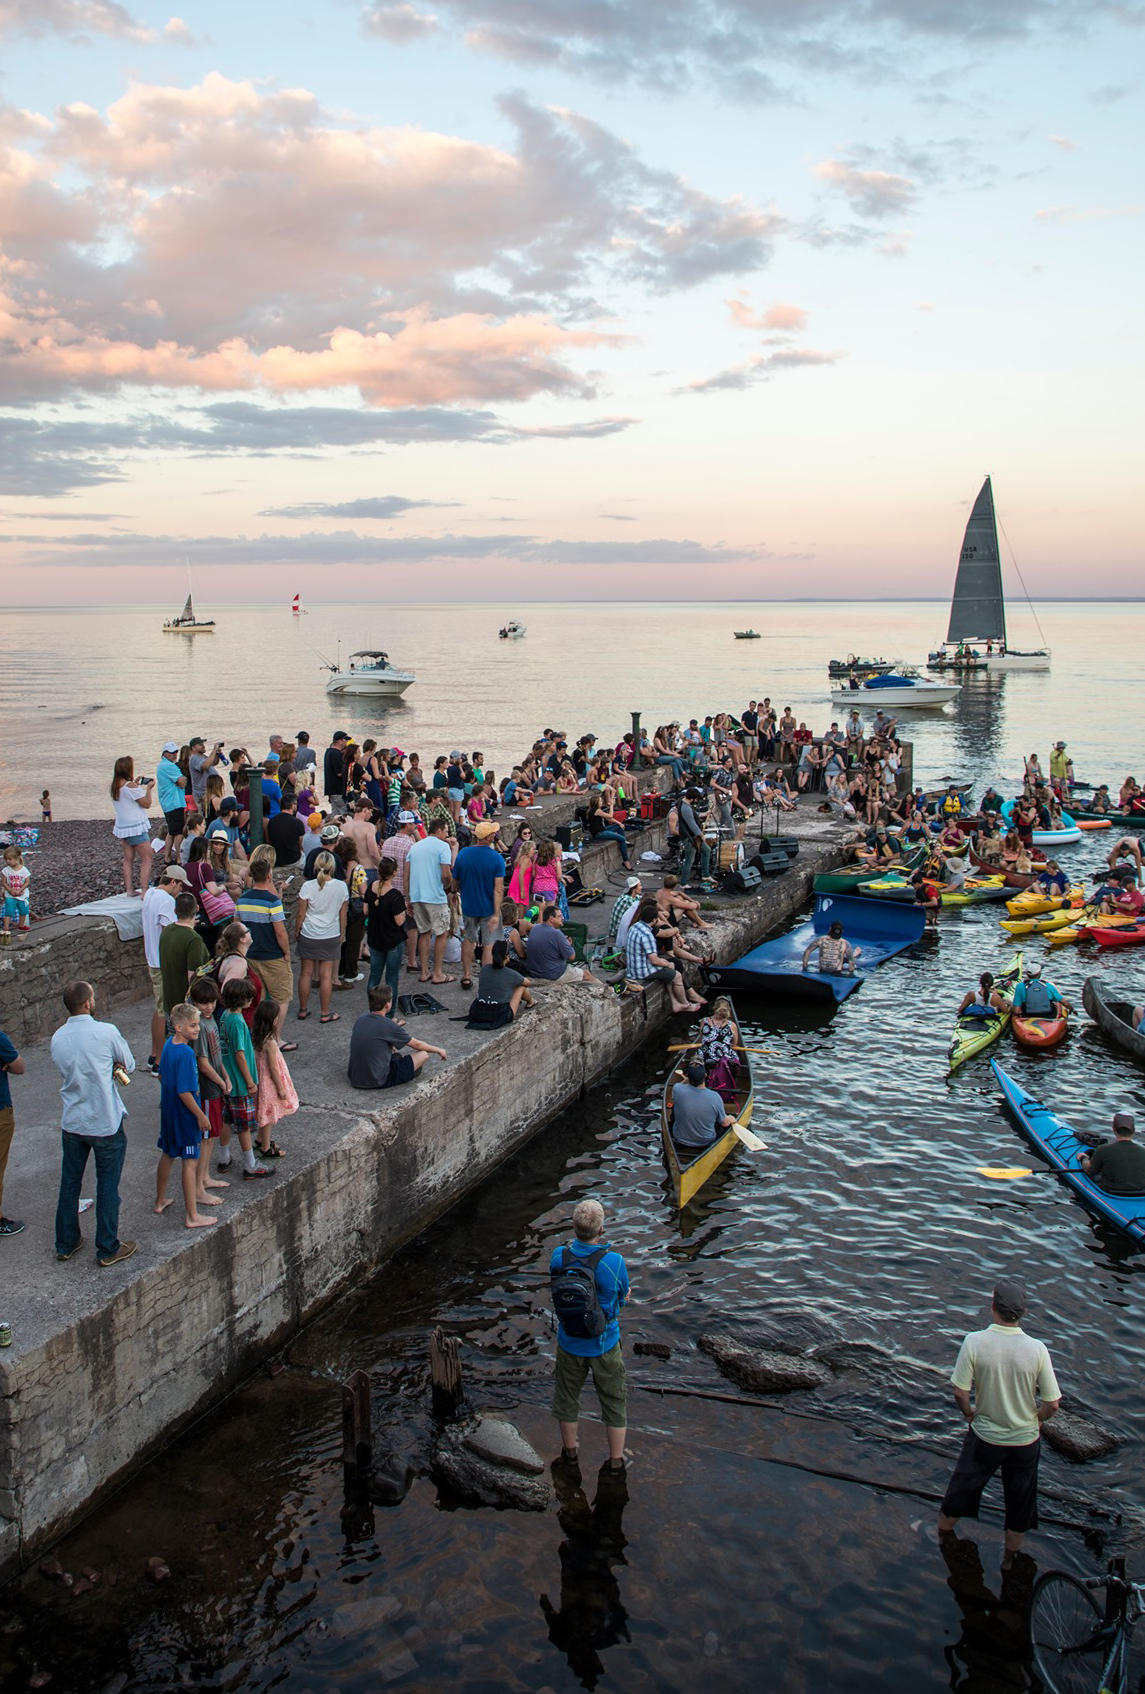 Glensheen Mansion hosts a weekly concert series in July with bands performing on the pier. Kayaks are encouraged.